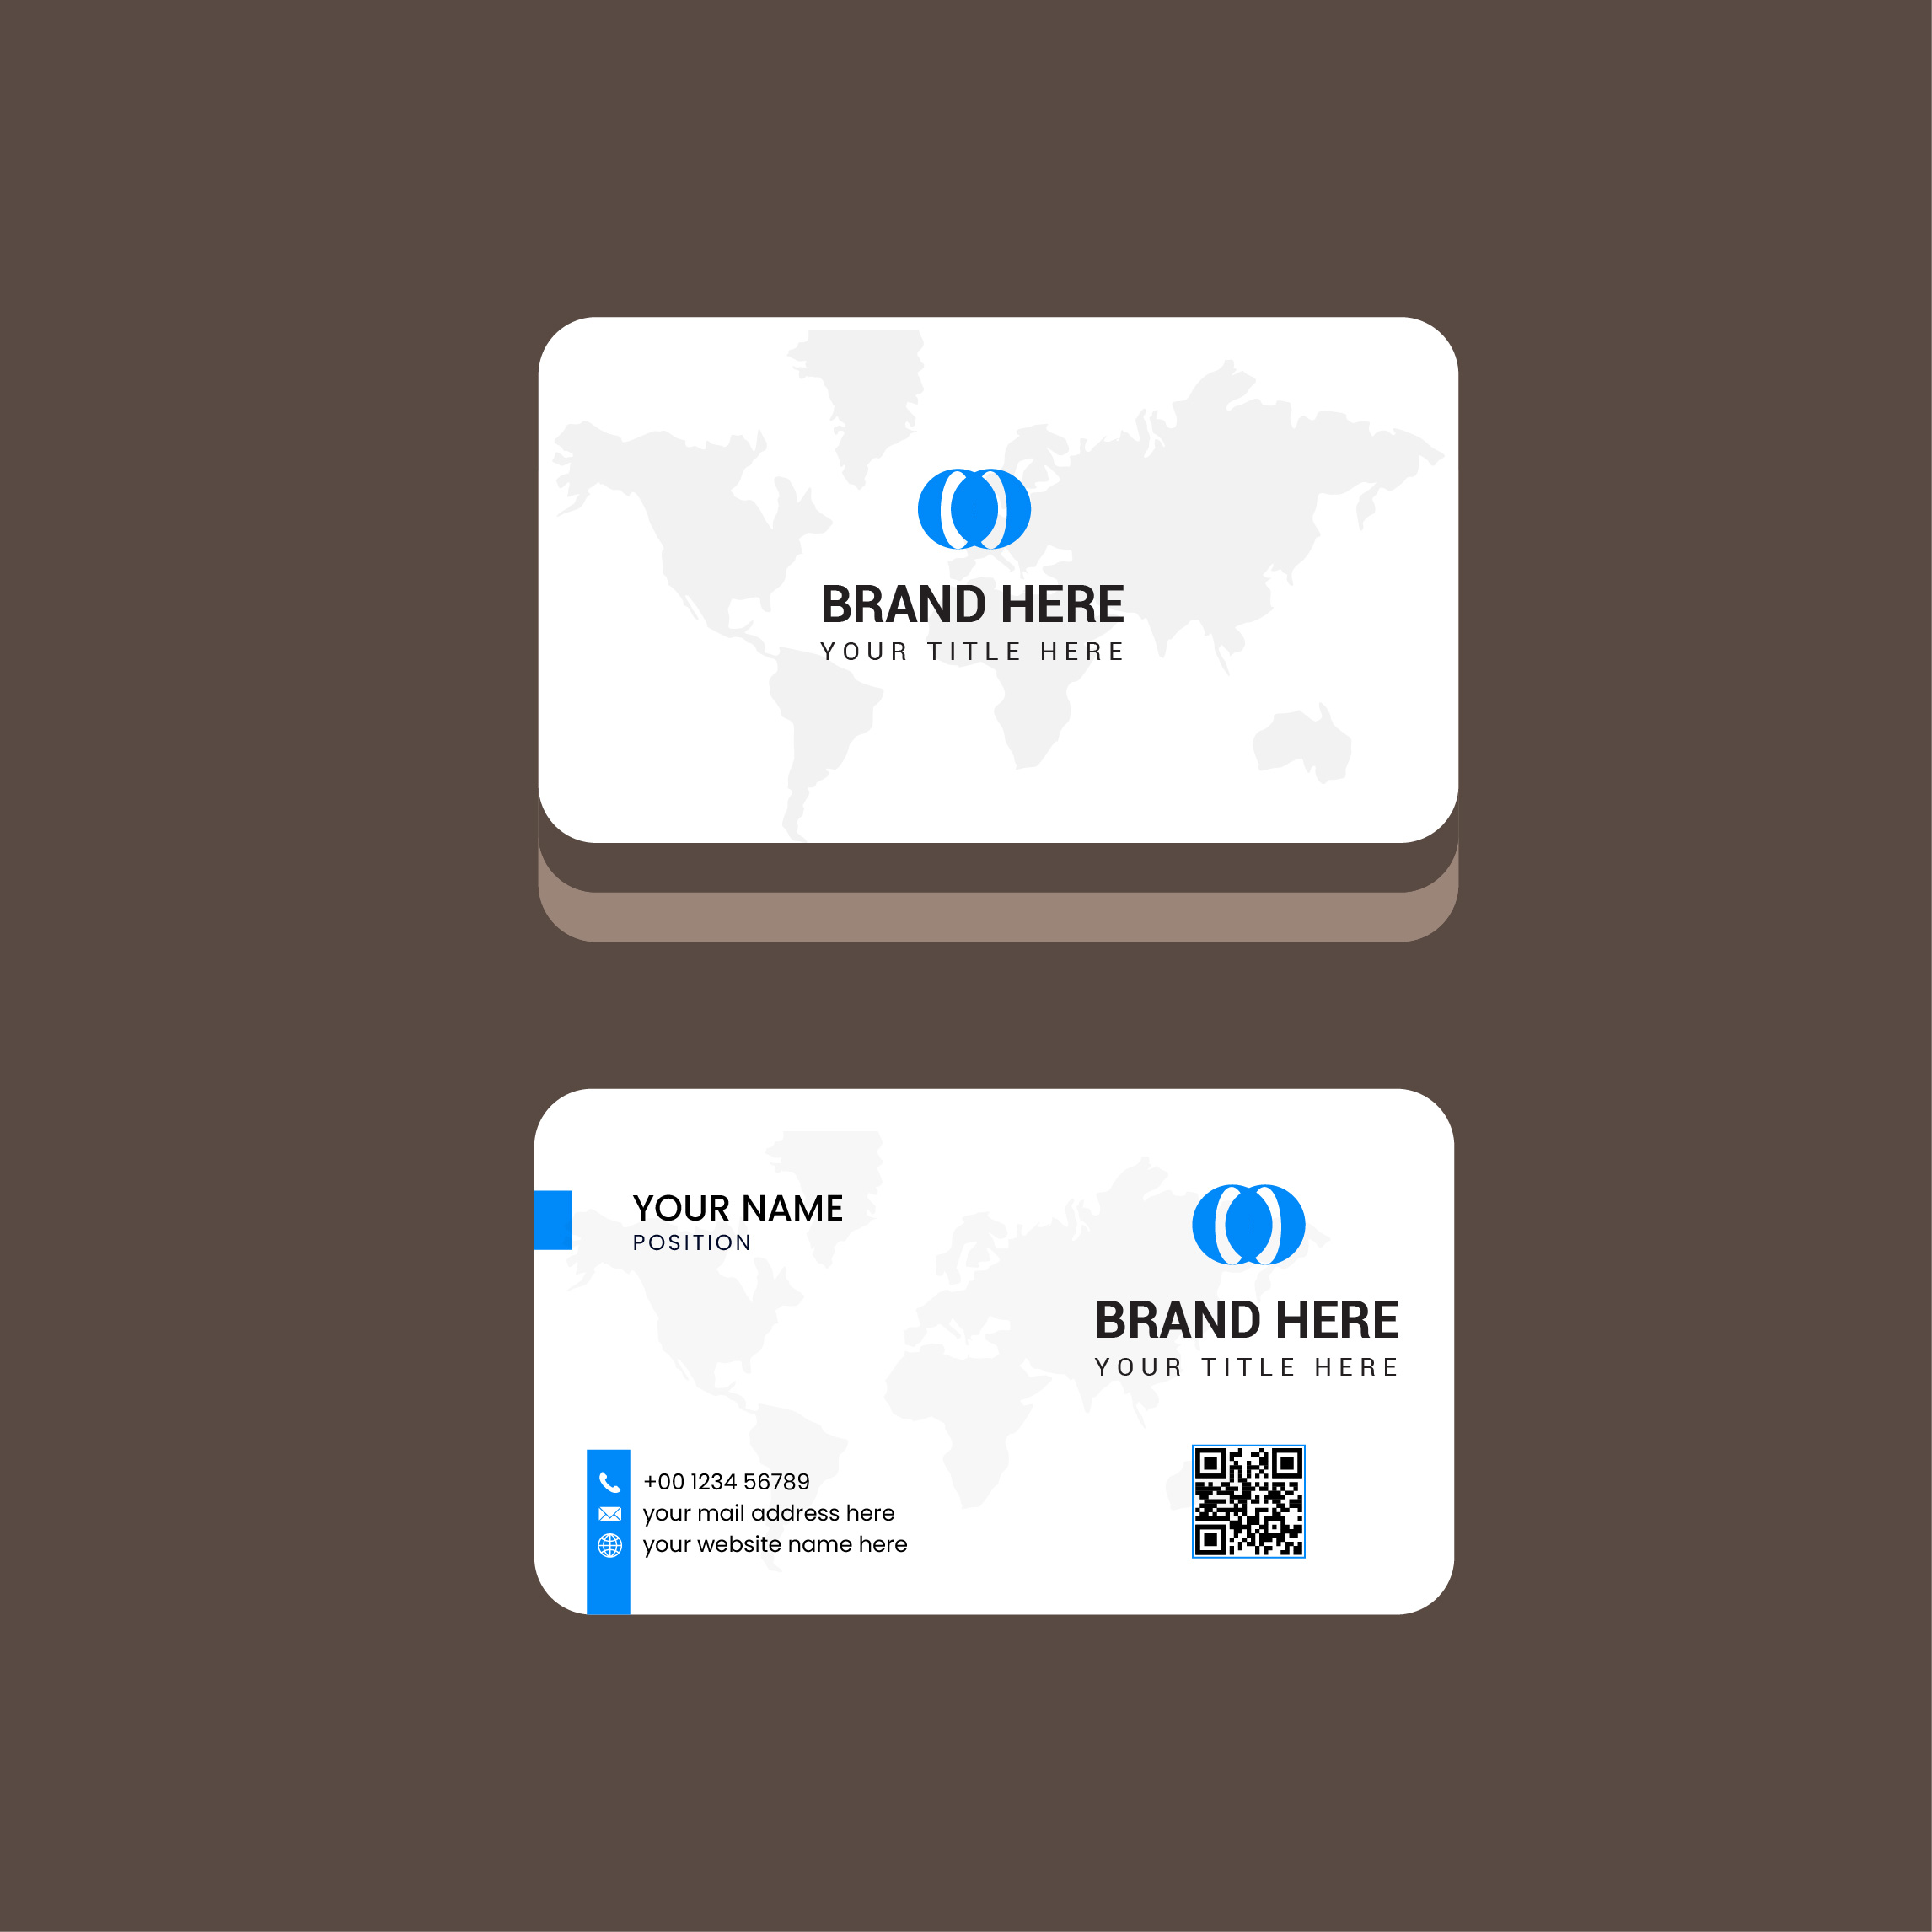 Modern Business Card Template cover image.